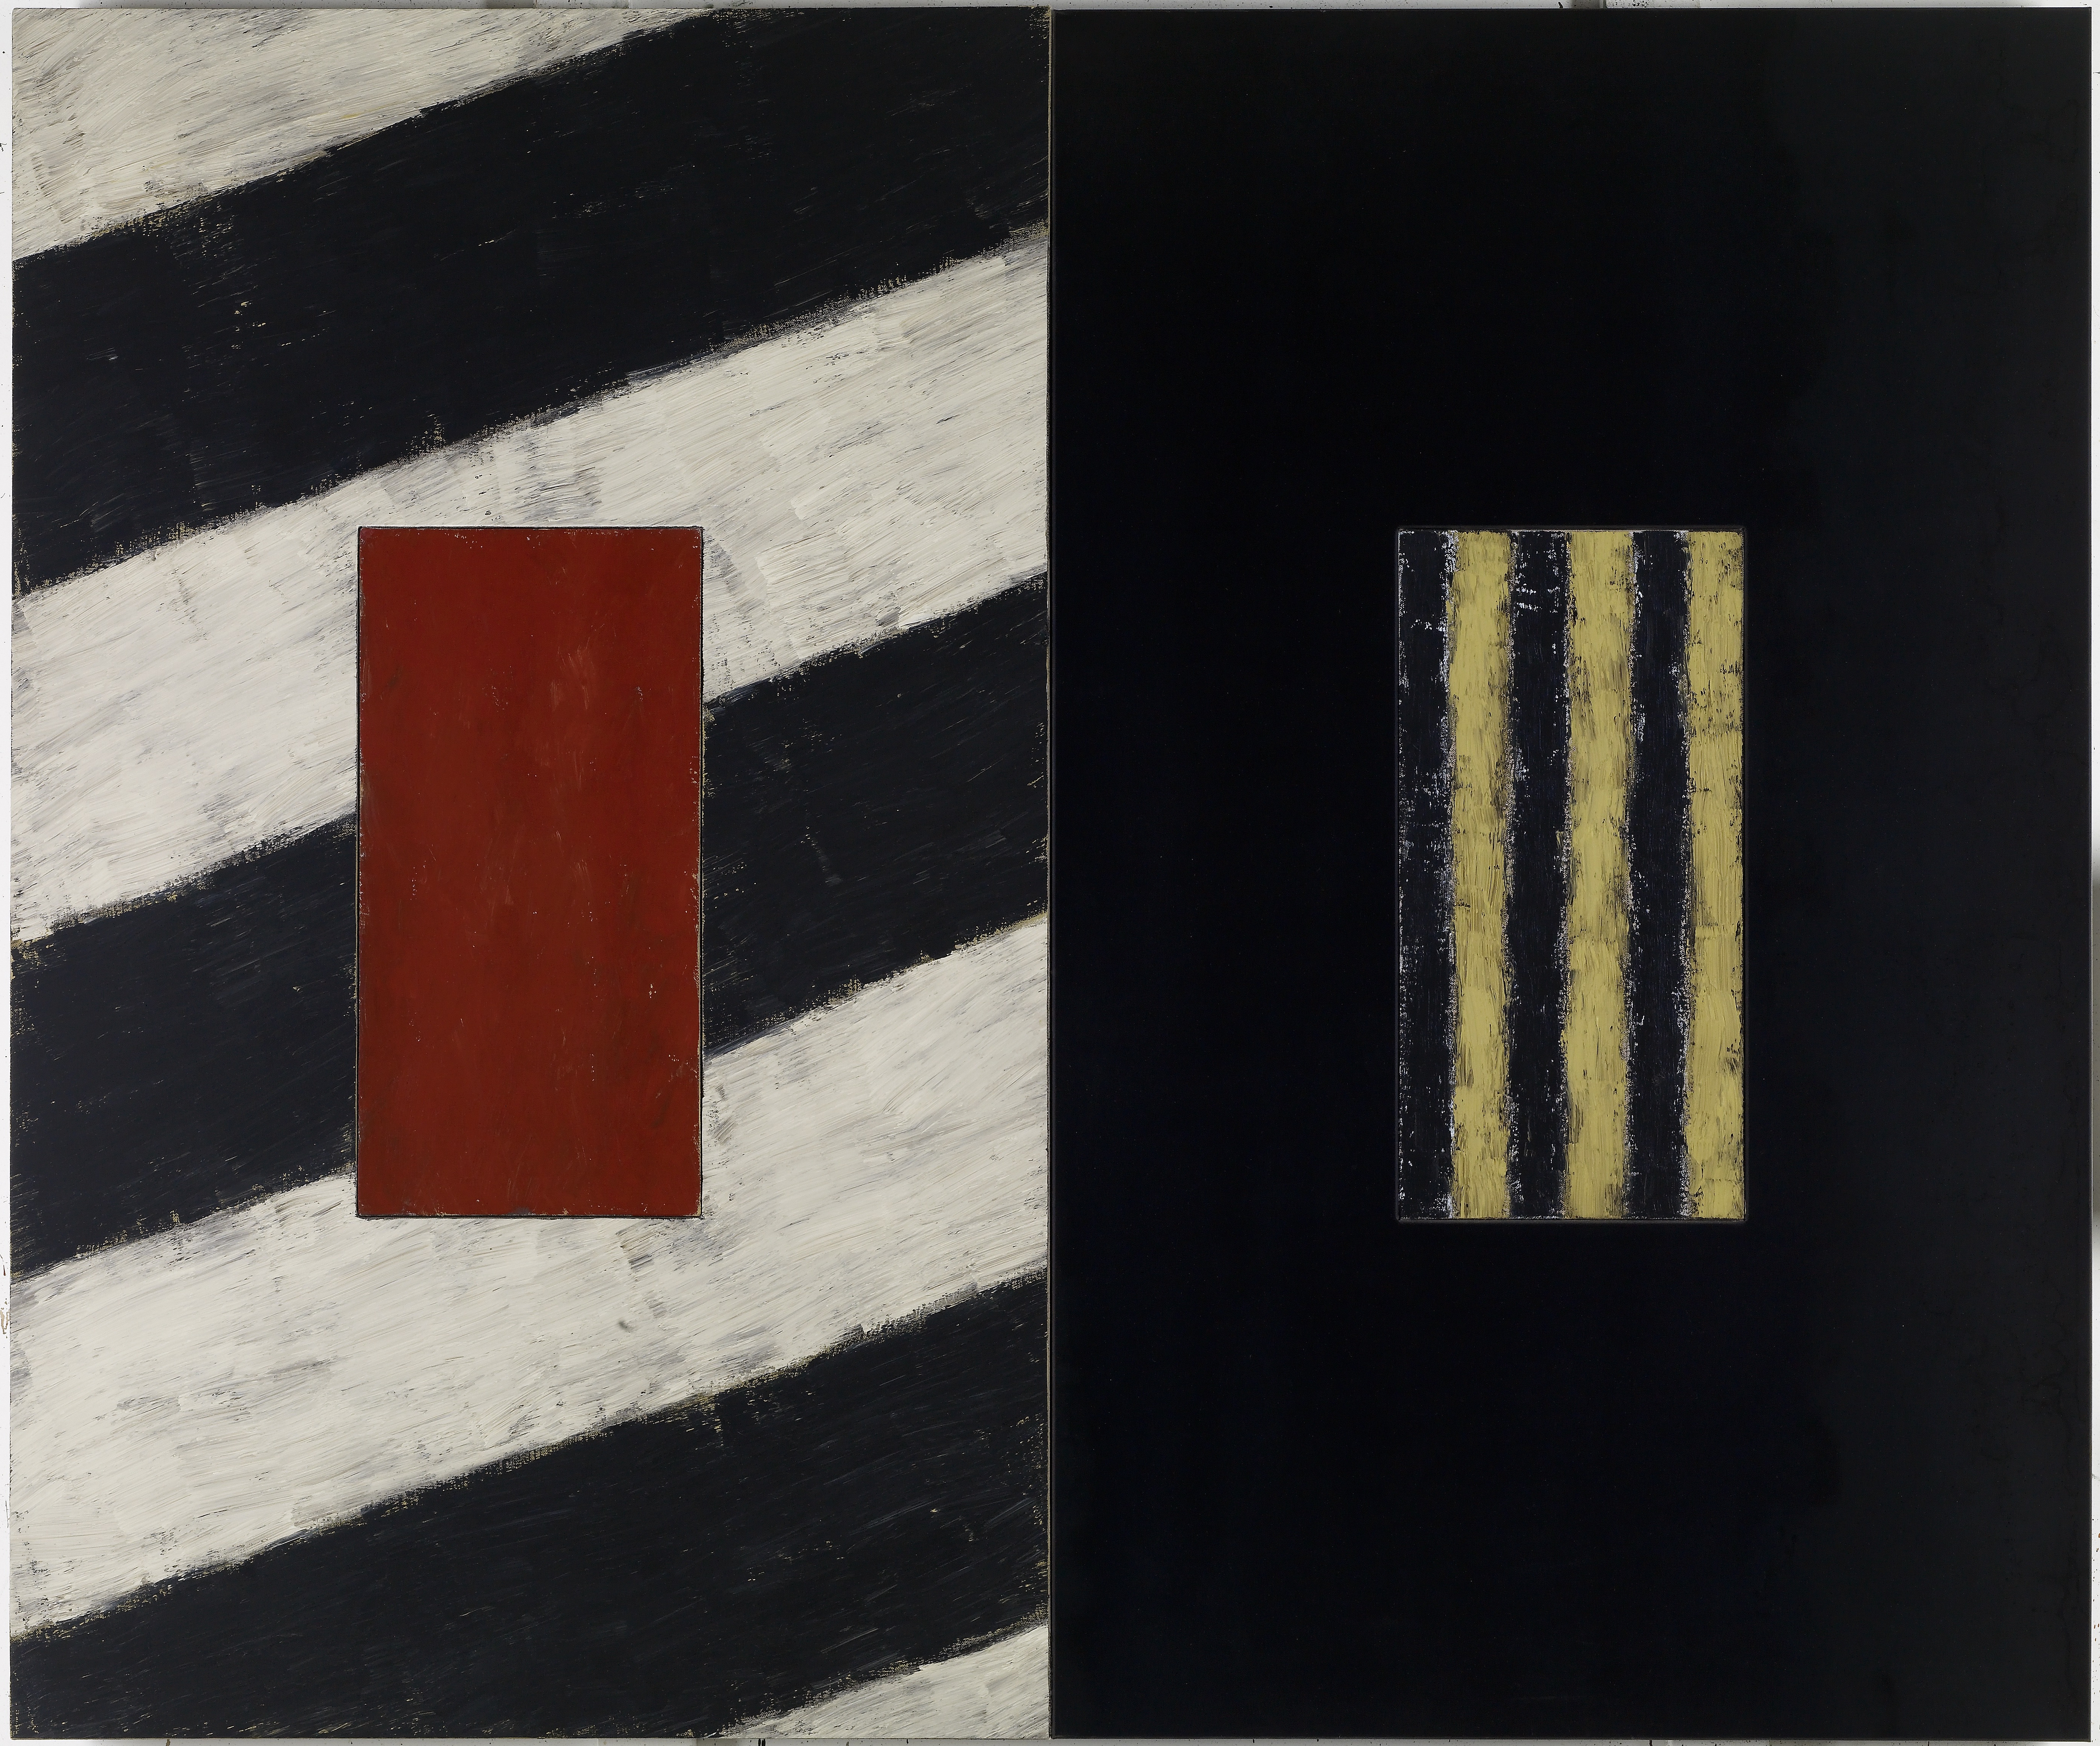 Sean Scully, Facing East (1991). Oil on linen and steel. 152.4 x 182.9 cm. Private collection.